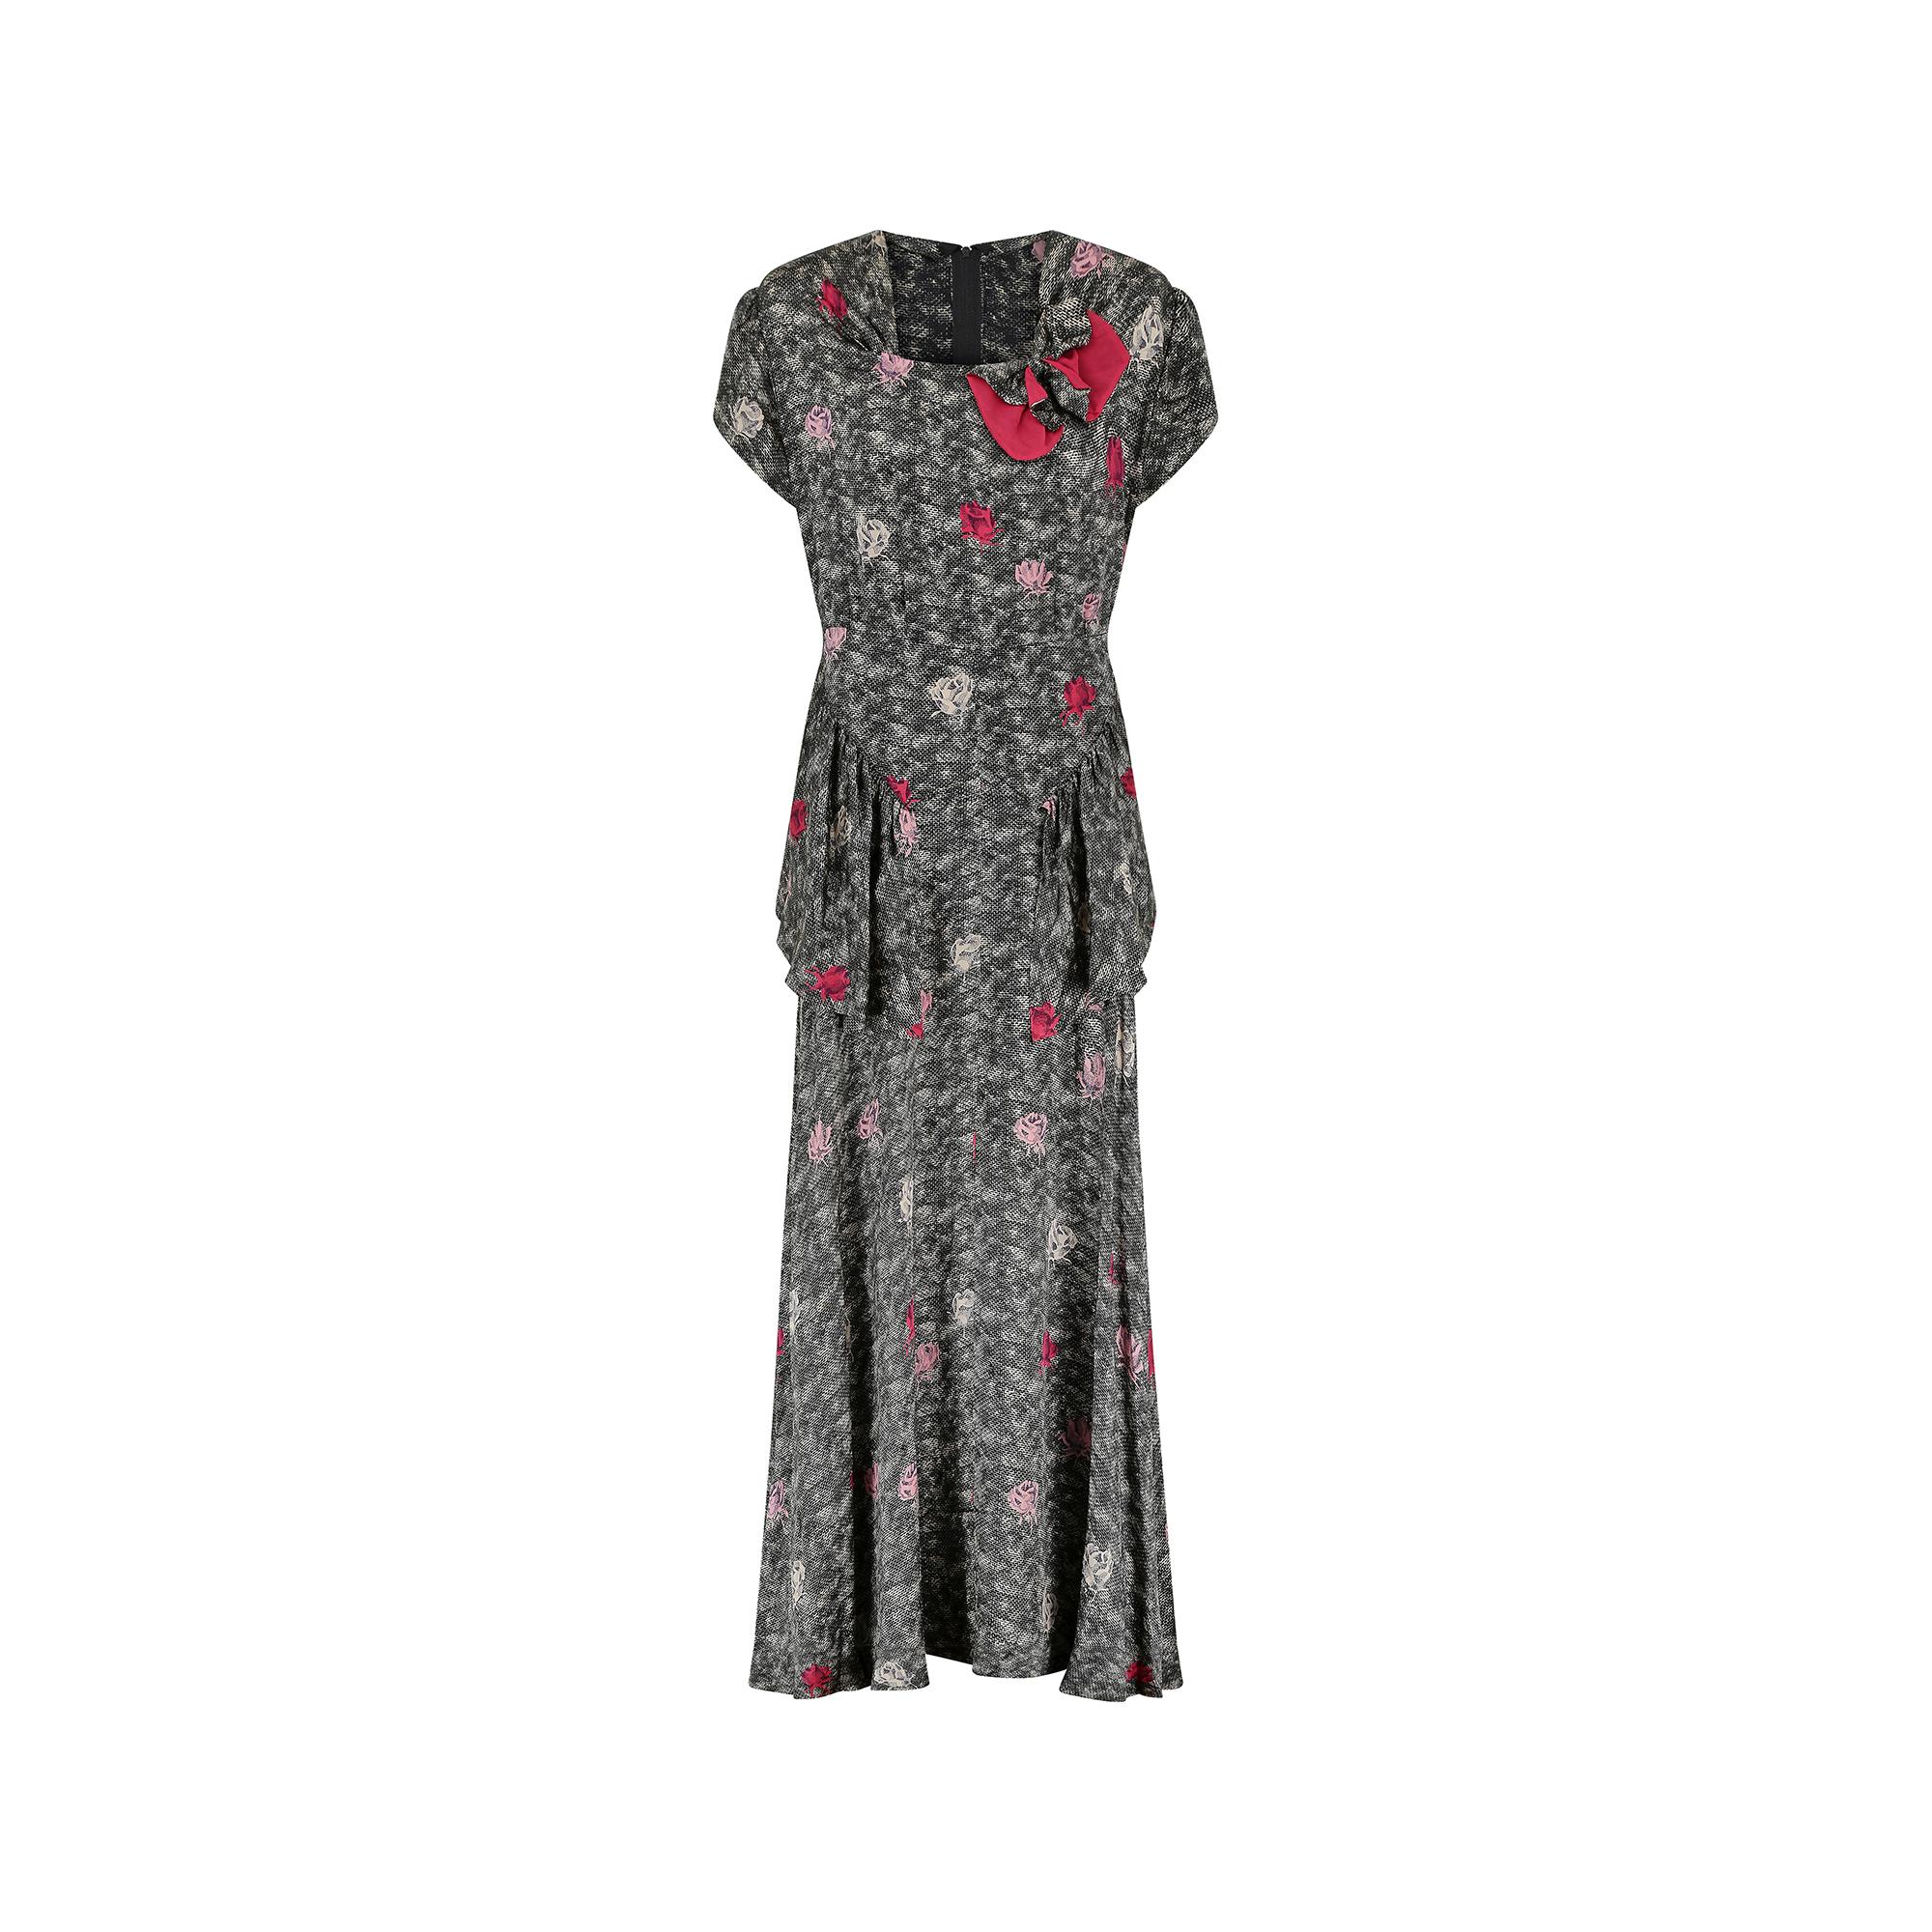 This superb and original 1940s silk peplum floor length dress is crafted from an exceptionally high-quality silk fabric with crepe accents. It has capped sleeves and a square neckline, with a 3D bow detail to the left side of the chest. This bow is